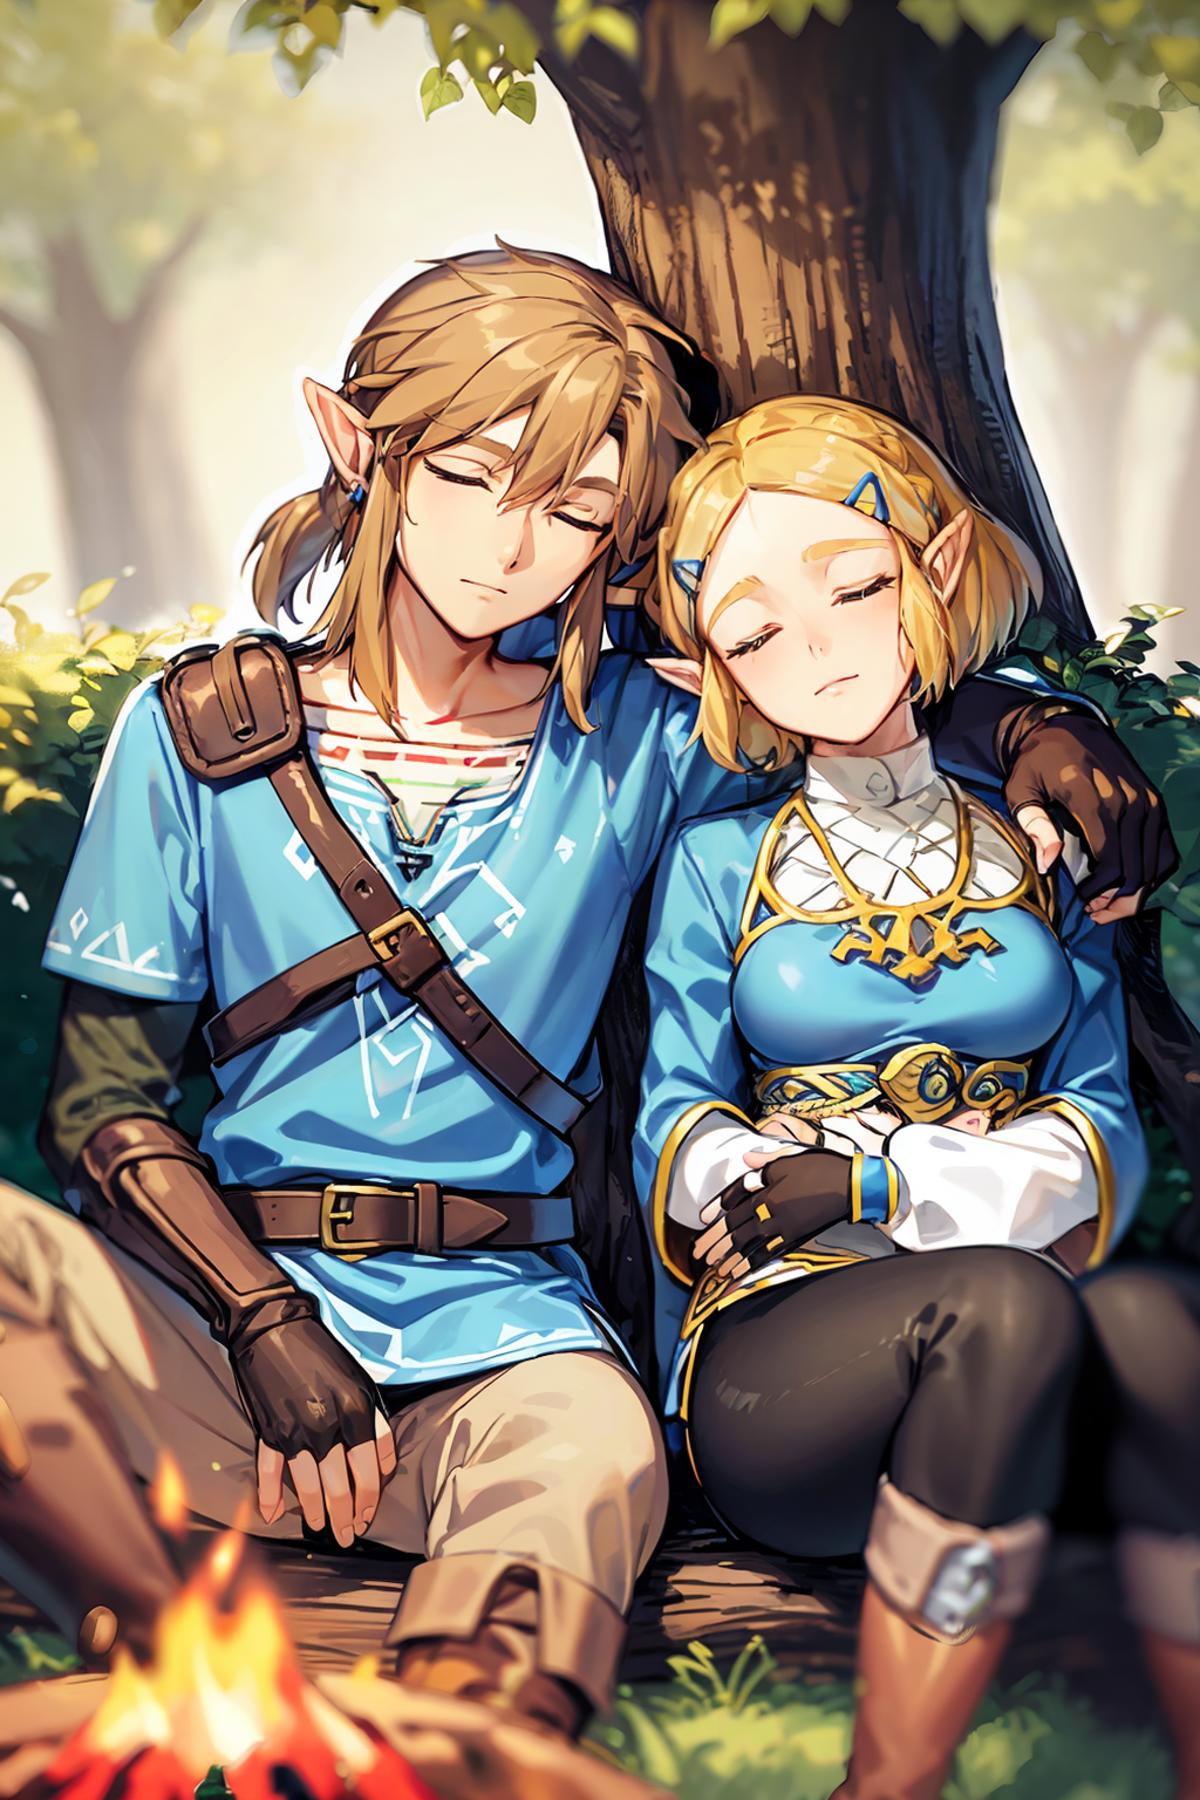 A cartoon drawing of a man and woman in Zelda costumes sitting under a tree.